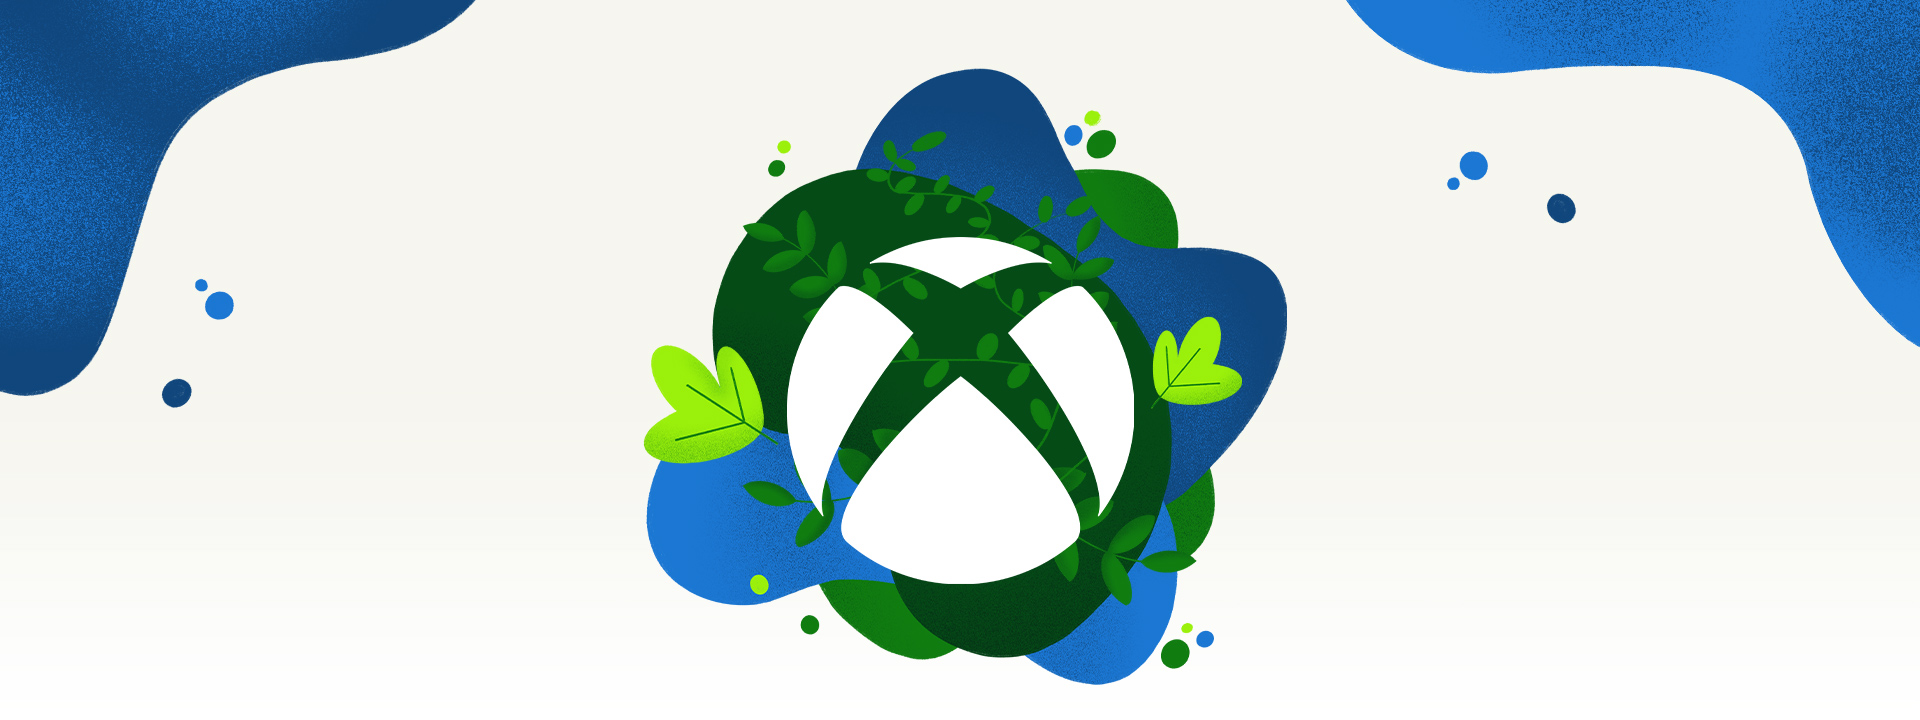 An Xbox logo is surrounded by vegetation and splashes of blue water.